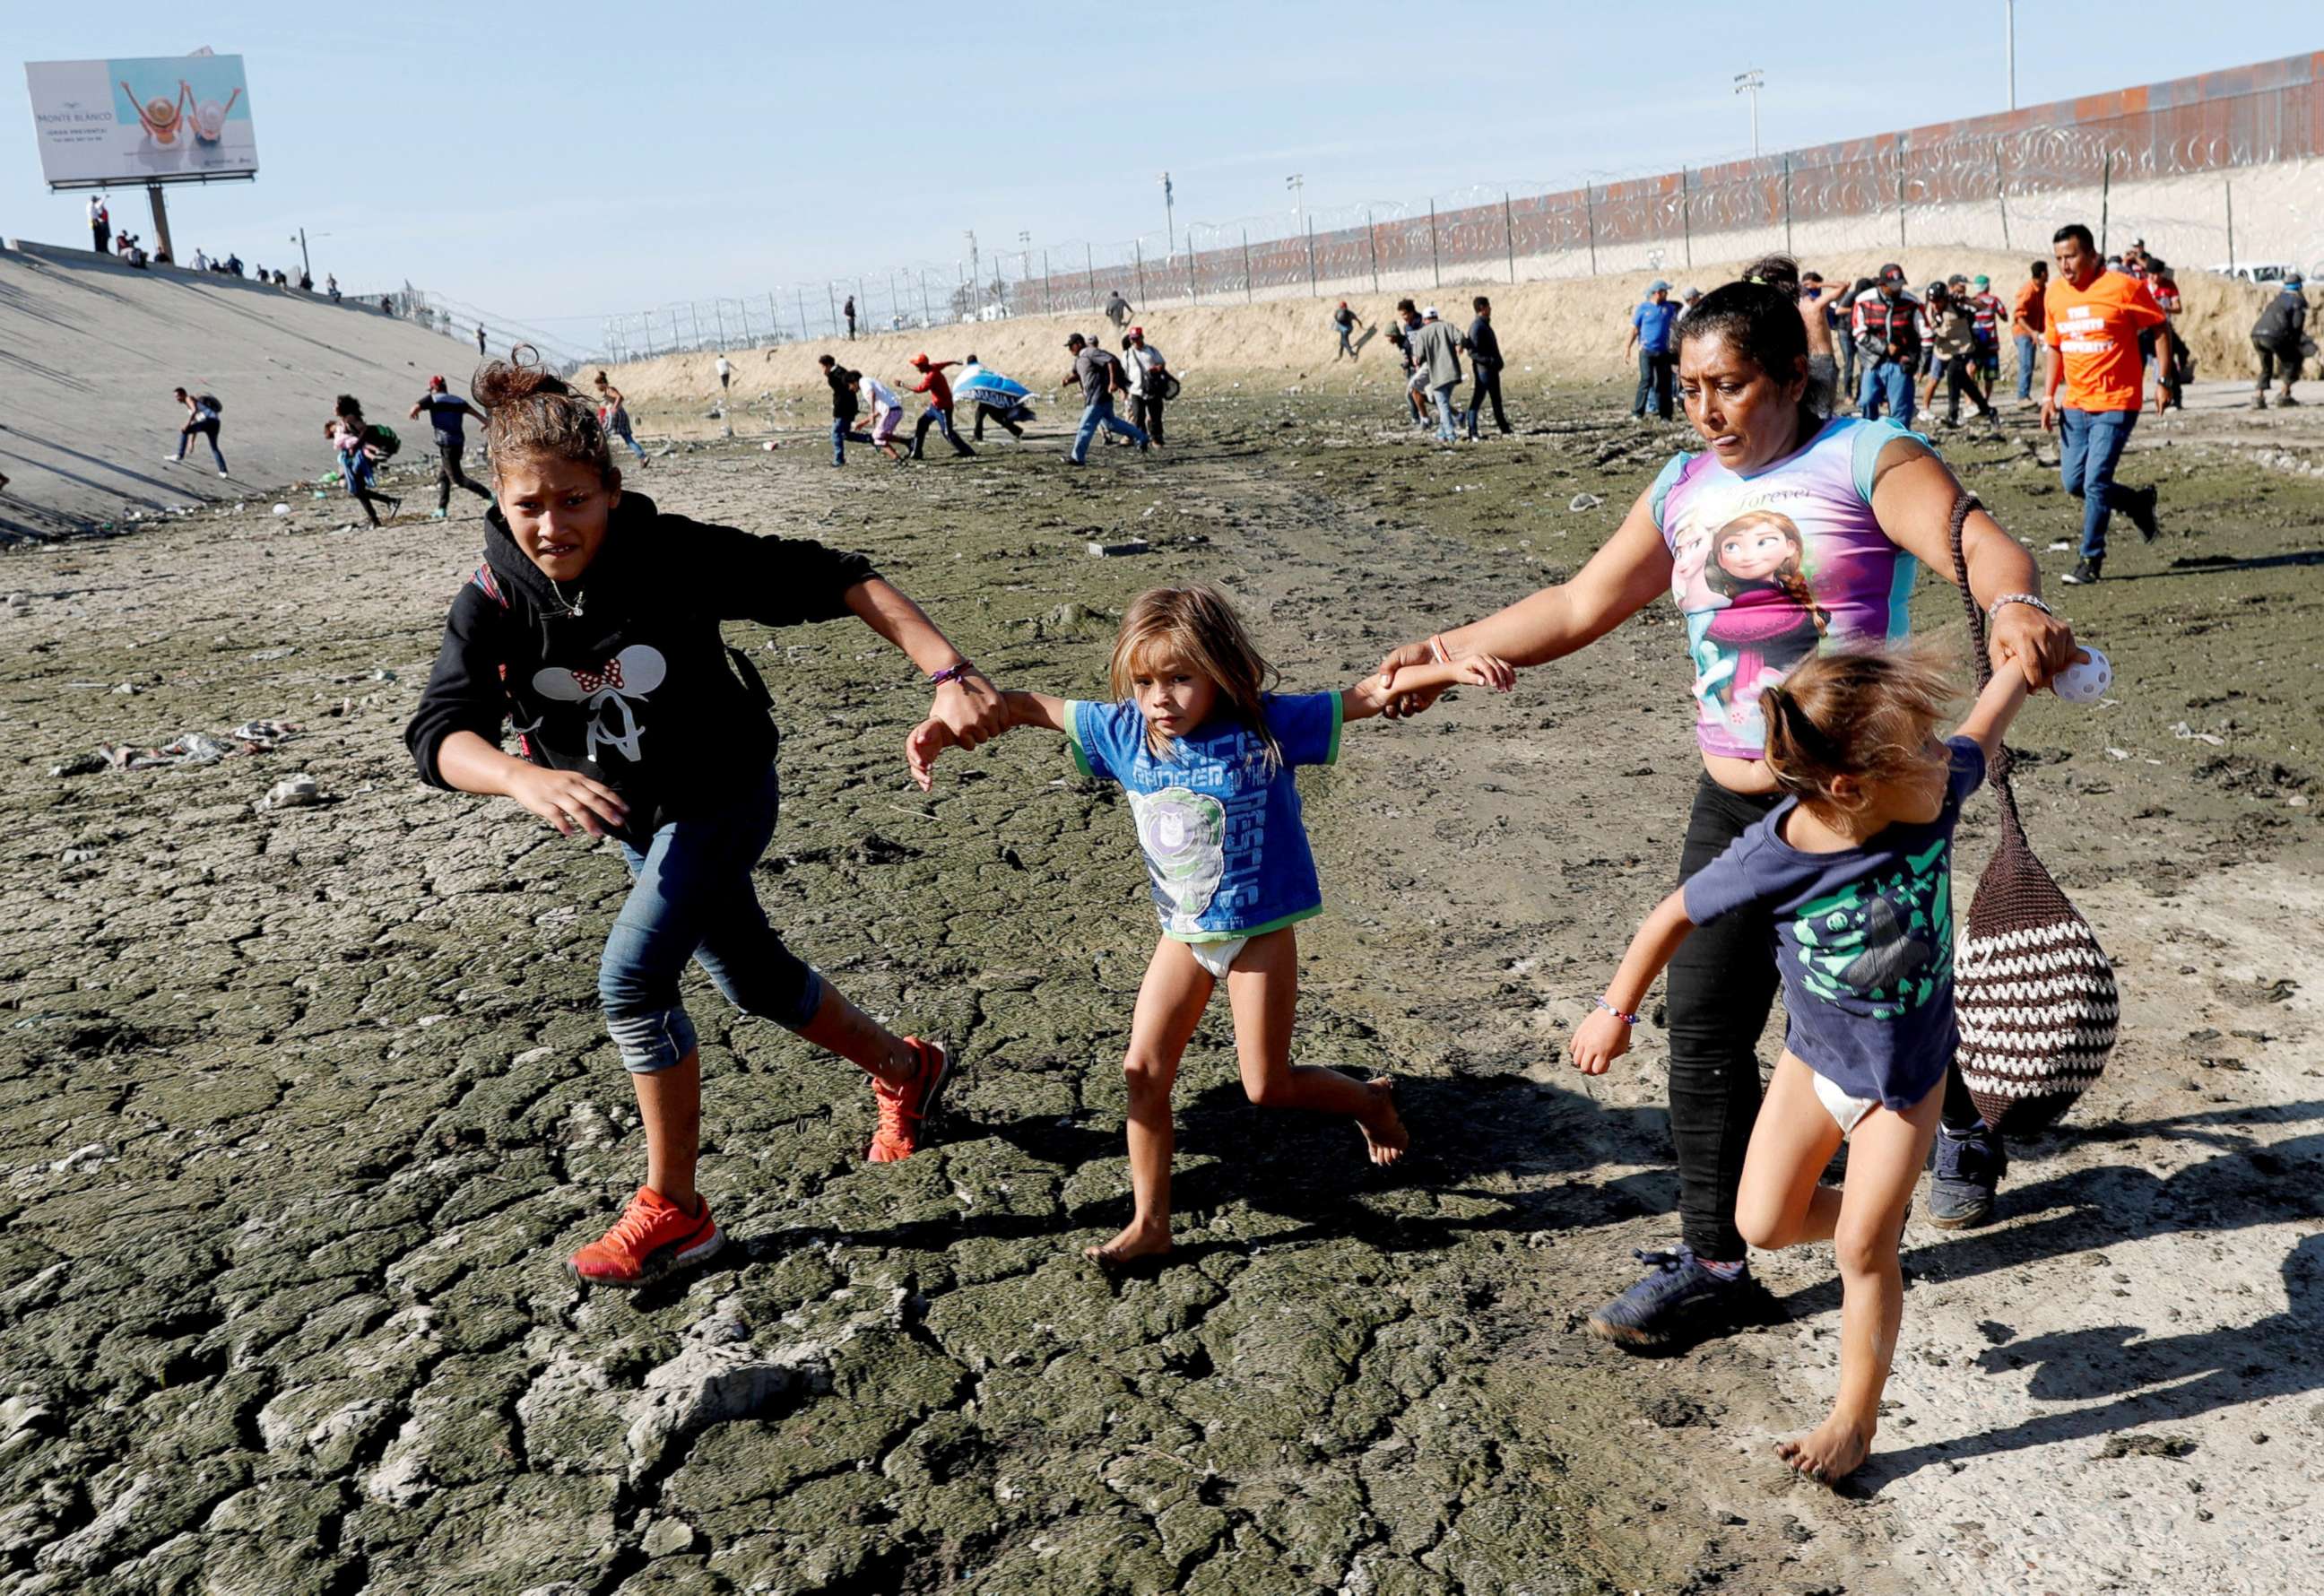 PHOTO: Maria Meza runs away from tear gas with her daughters Jamie Mejia Meza, aged 12 and her five-year-old twin daughters Saira Mejia Meza and Cheili Mejia Meza in front of the border wall between the U.S and Mexico, in Tijuana, Mexico Nov. 25, 2018.